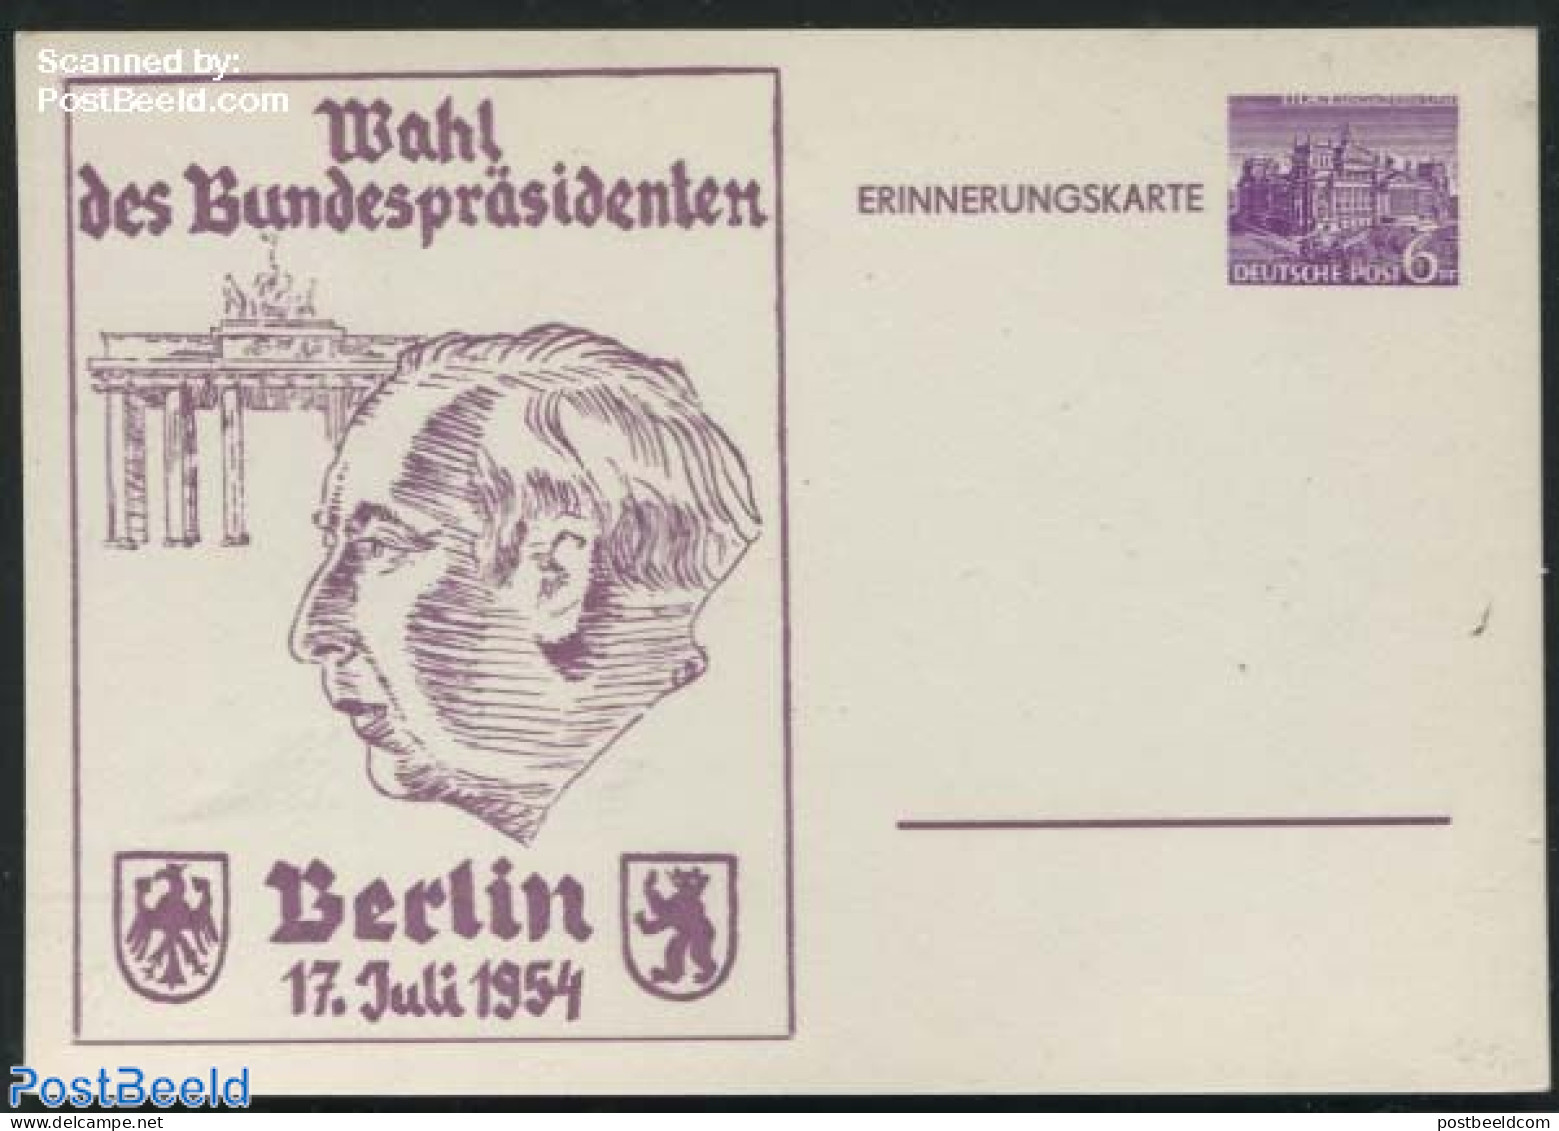 Germany, Berlin 1954 Postcard 6pf, Presidential Elections, Unused Postal Stationary - Covers & Documents